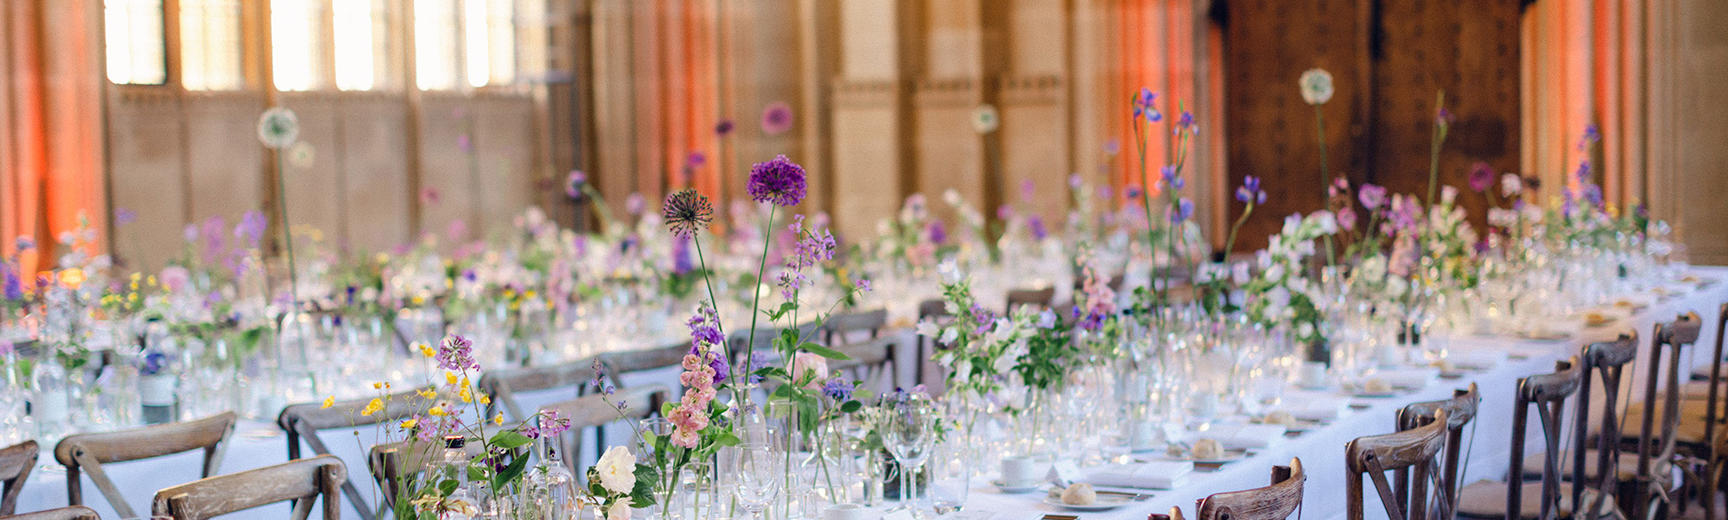 A simple table decoration with wild flowers in the Divinity School at the Bodleian Library